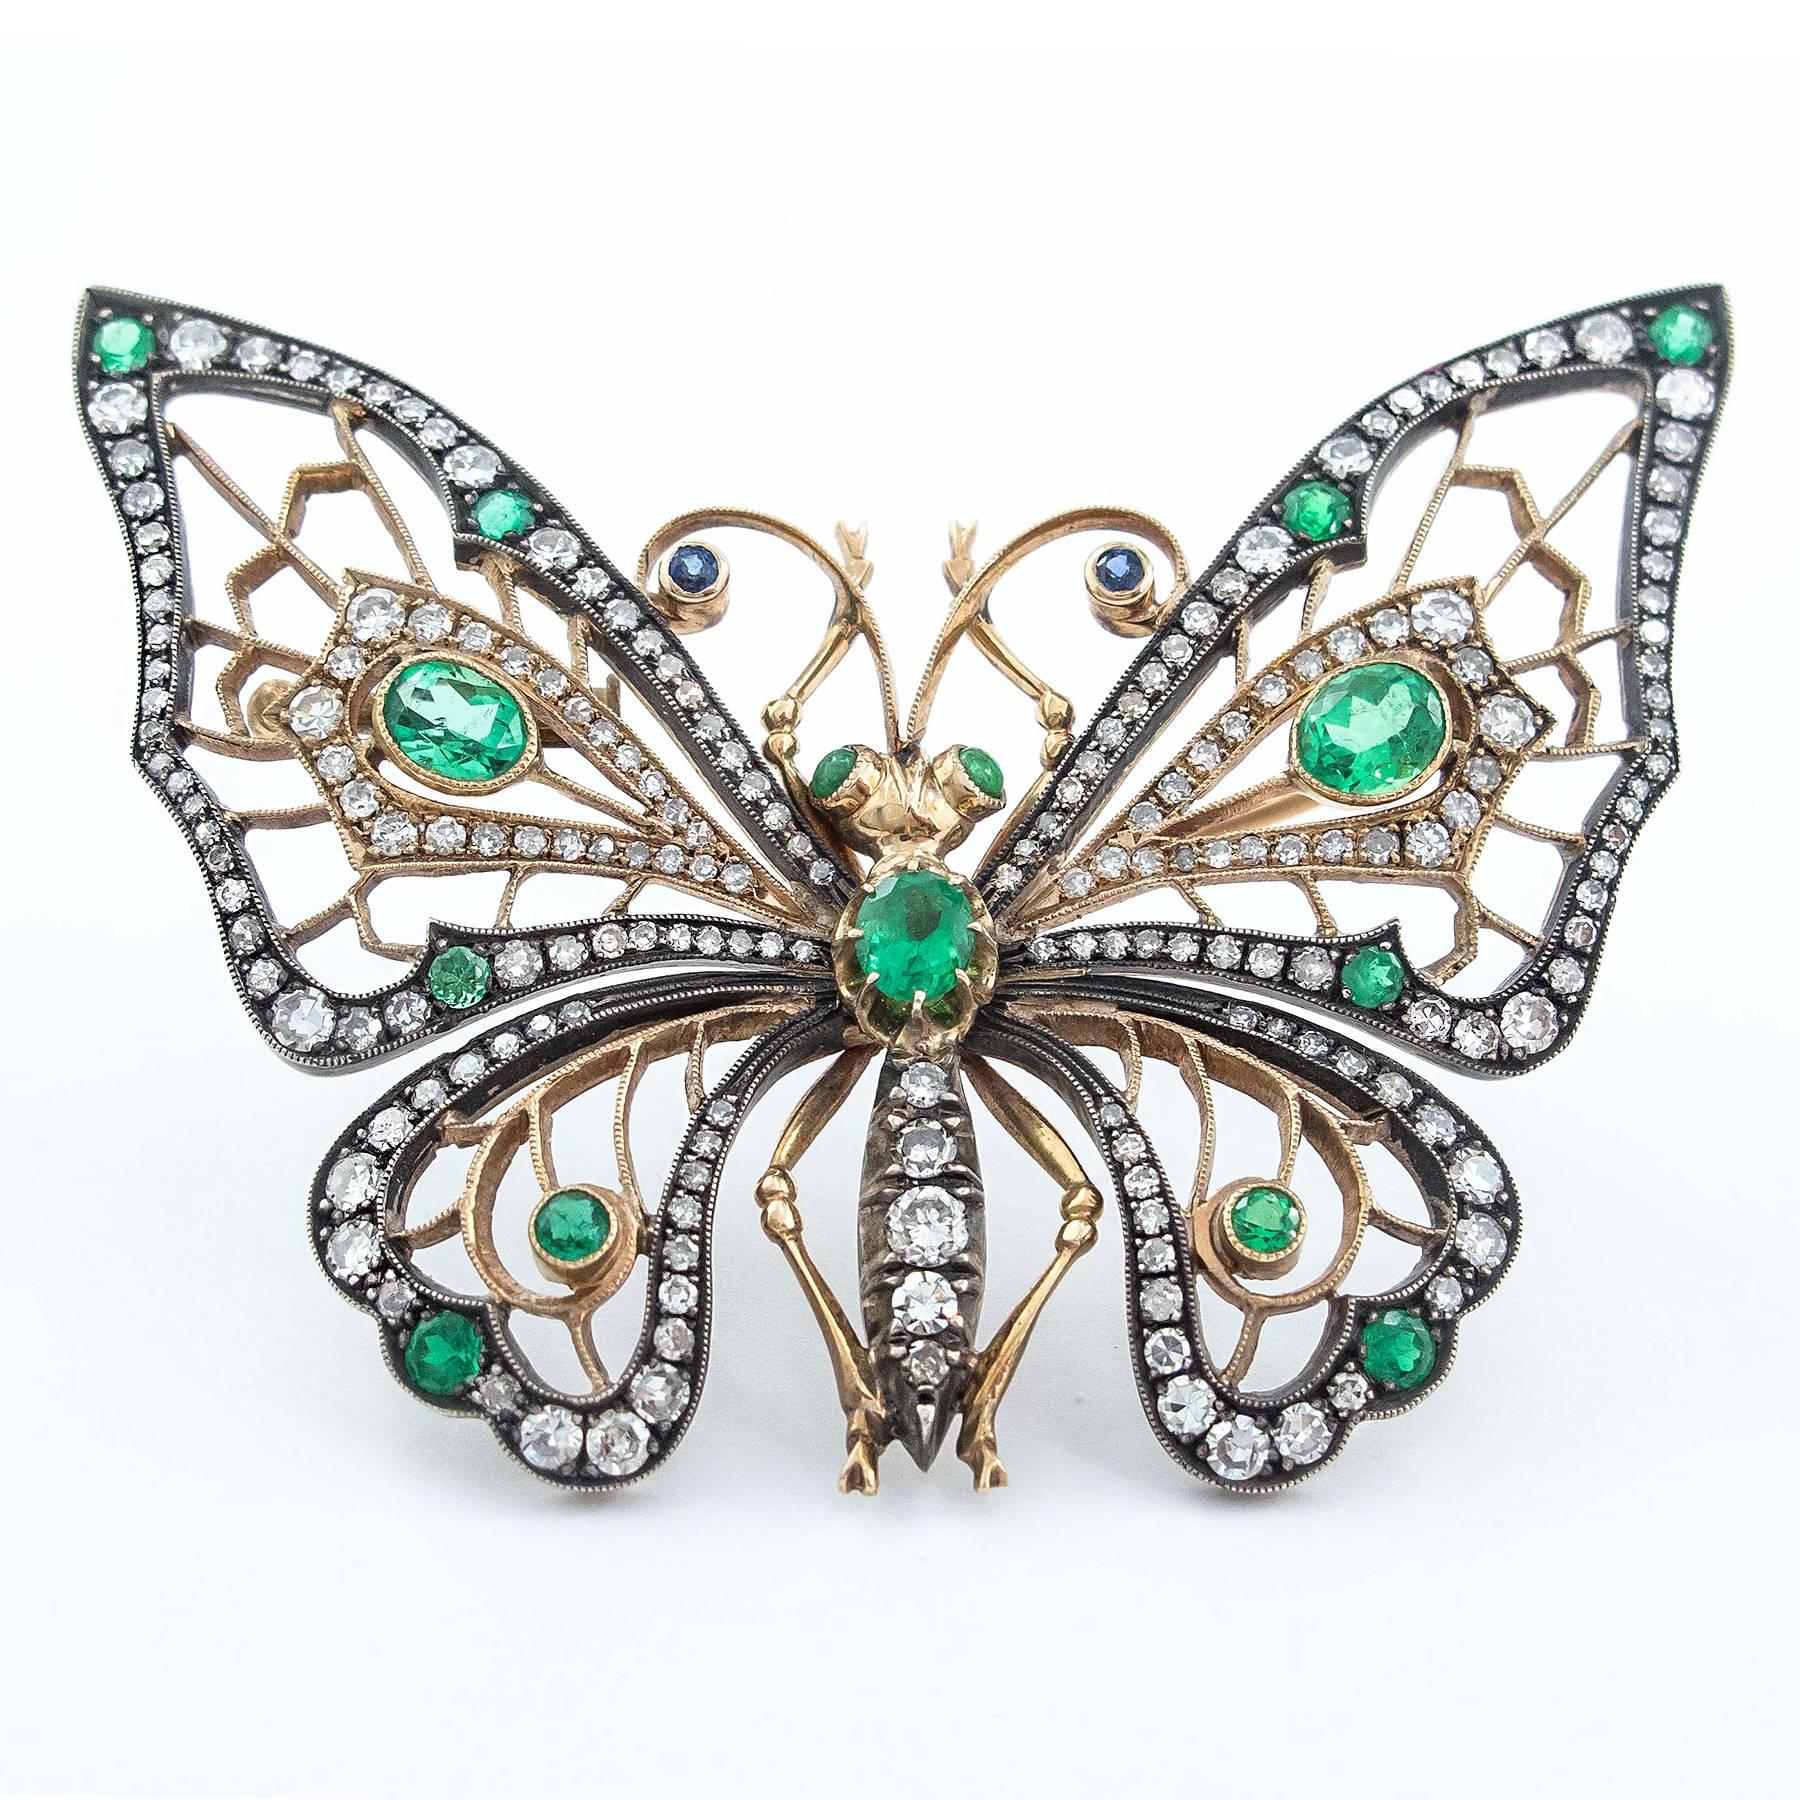 A gorgeous Emerald Diamond Butterfly Brooch is set with 206 Emeralds and Diamonds totaling 4.25 carats. It is further detailed with 2 small Blue Sapphire cabochon eyes and set in a hand crafted 14 Karat gold and silver mount.

The butterfly is a